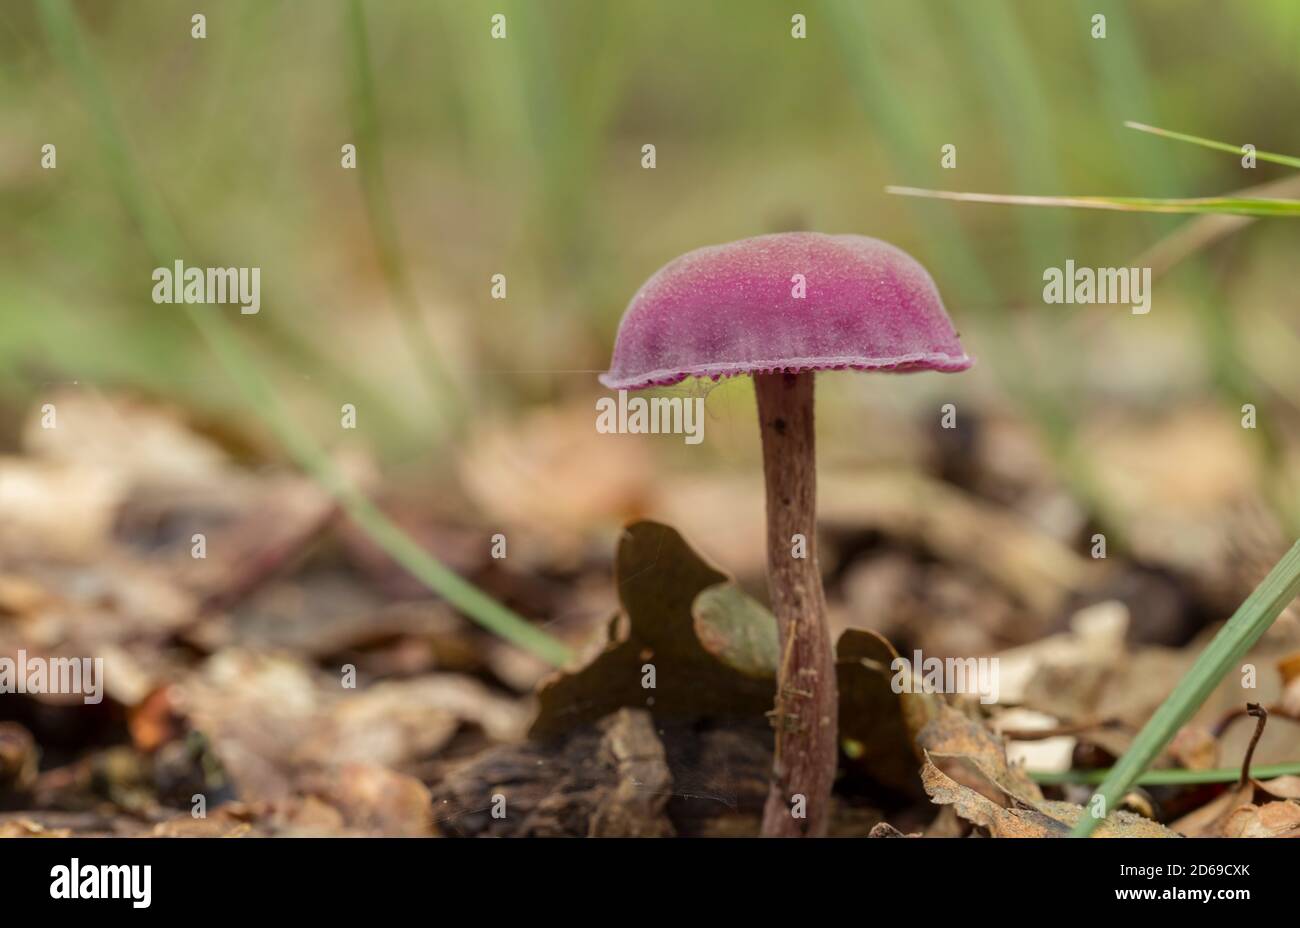 purple mushroom in soft focus with shallow depth. Laccaria amethystina or the amethyst deceiver between the moss and ferns on the forest floor. Stock Photo